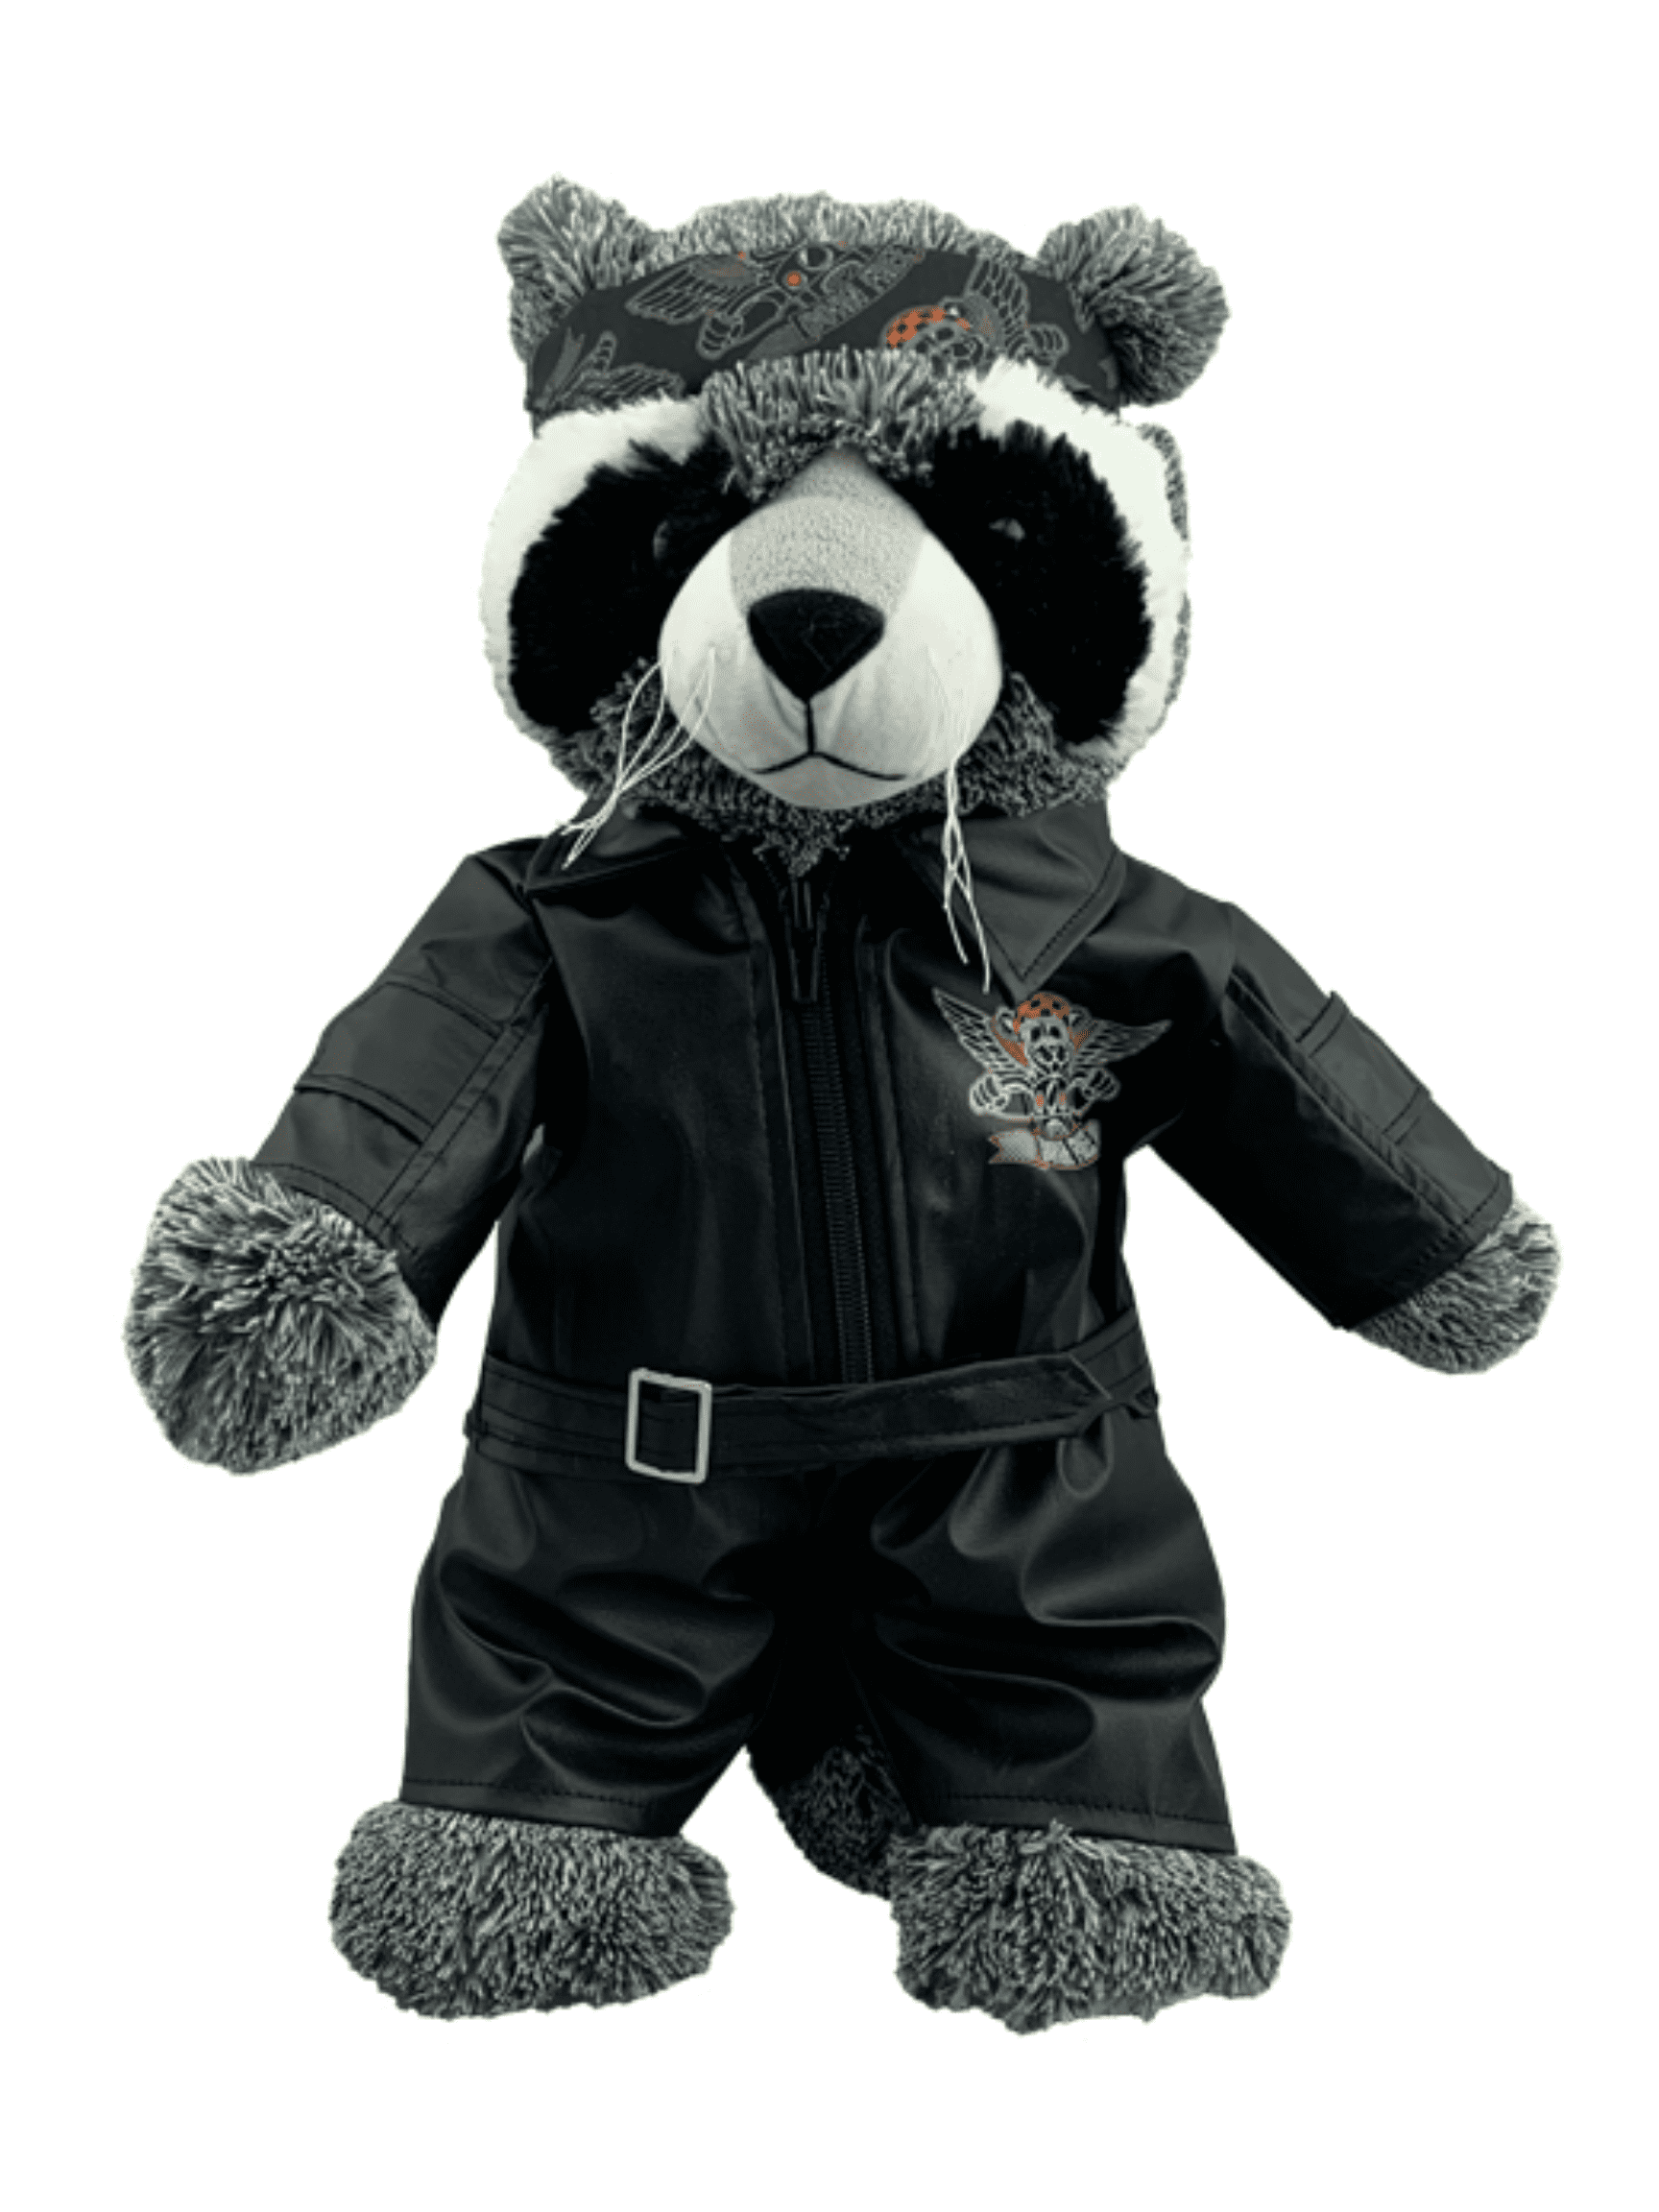 Build a Bear outfit Teddy Bear Outfit Soccer Doll clothes Plushie toy 